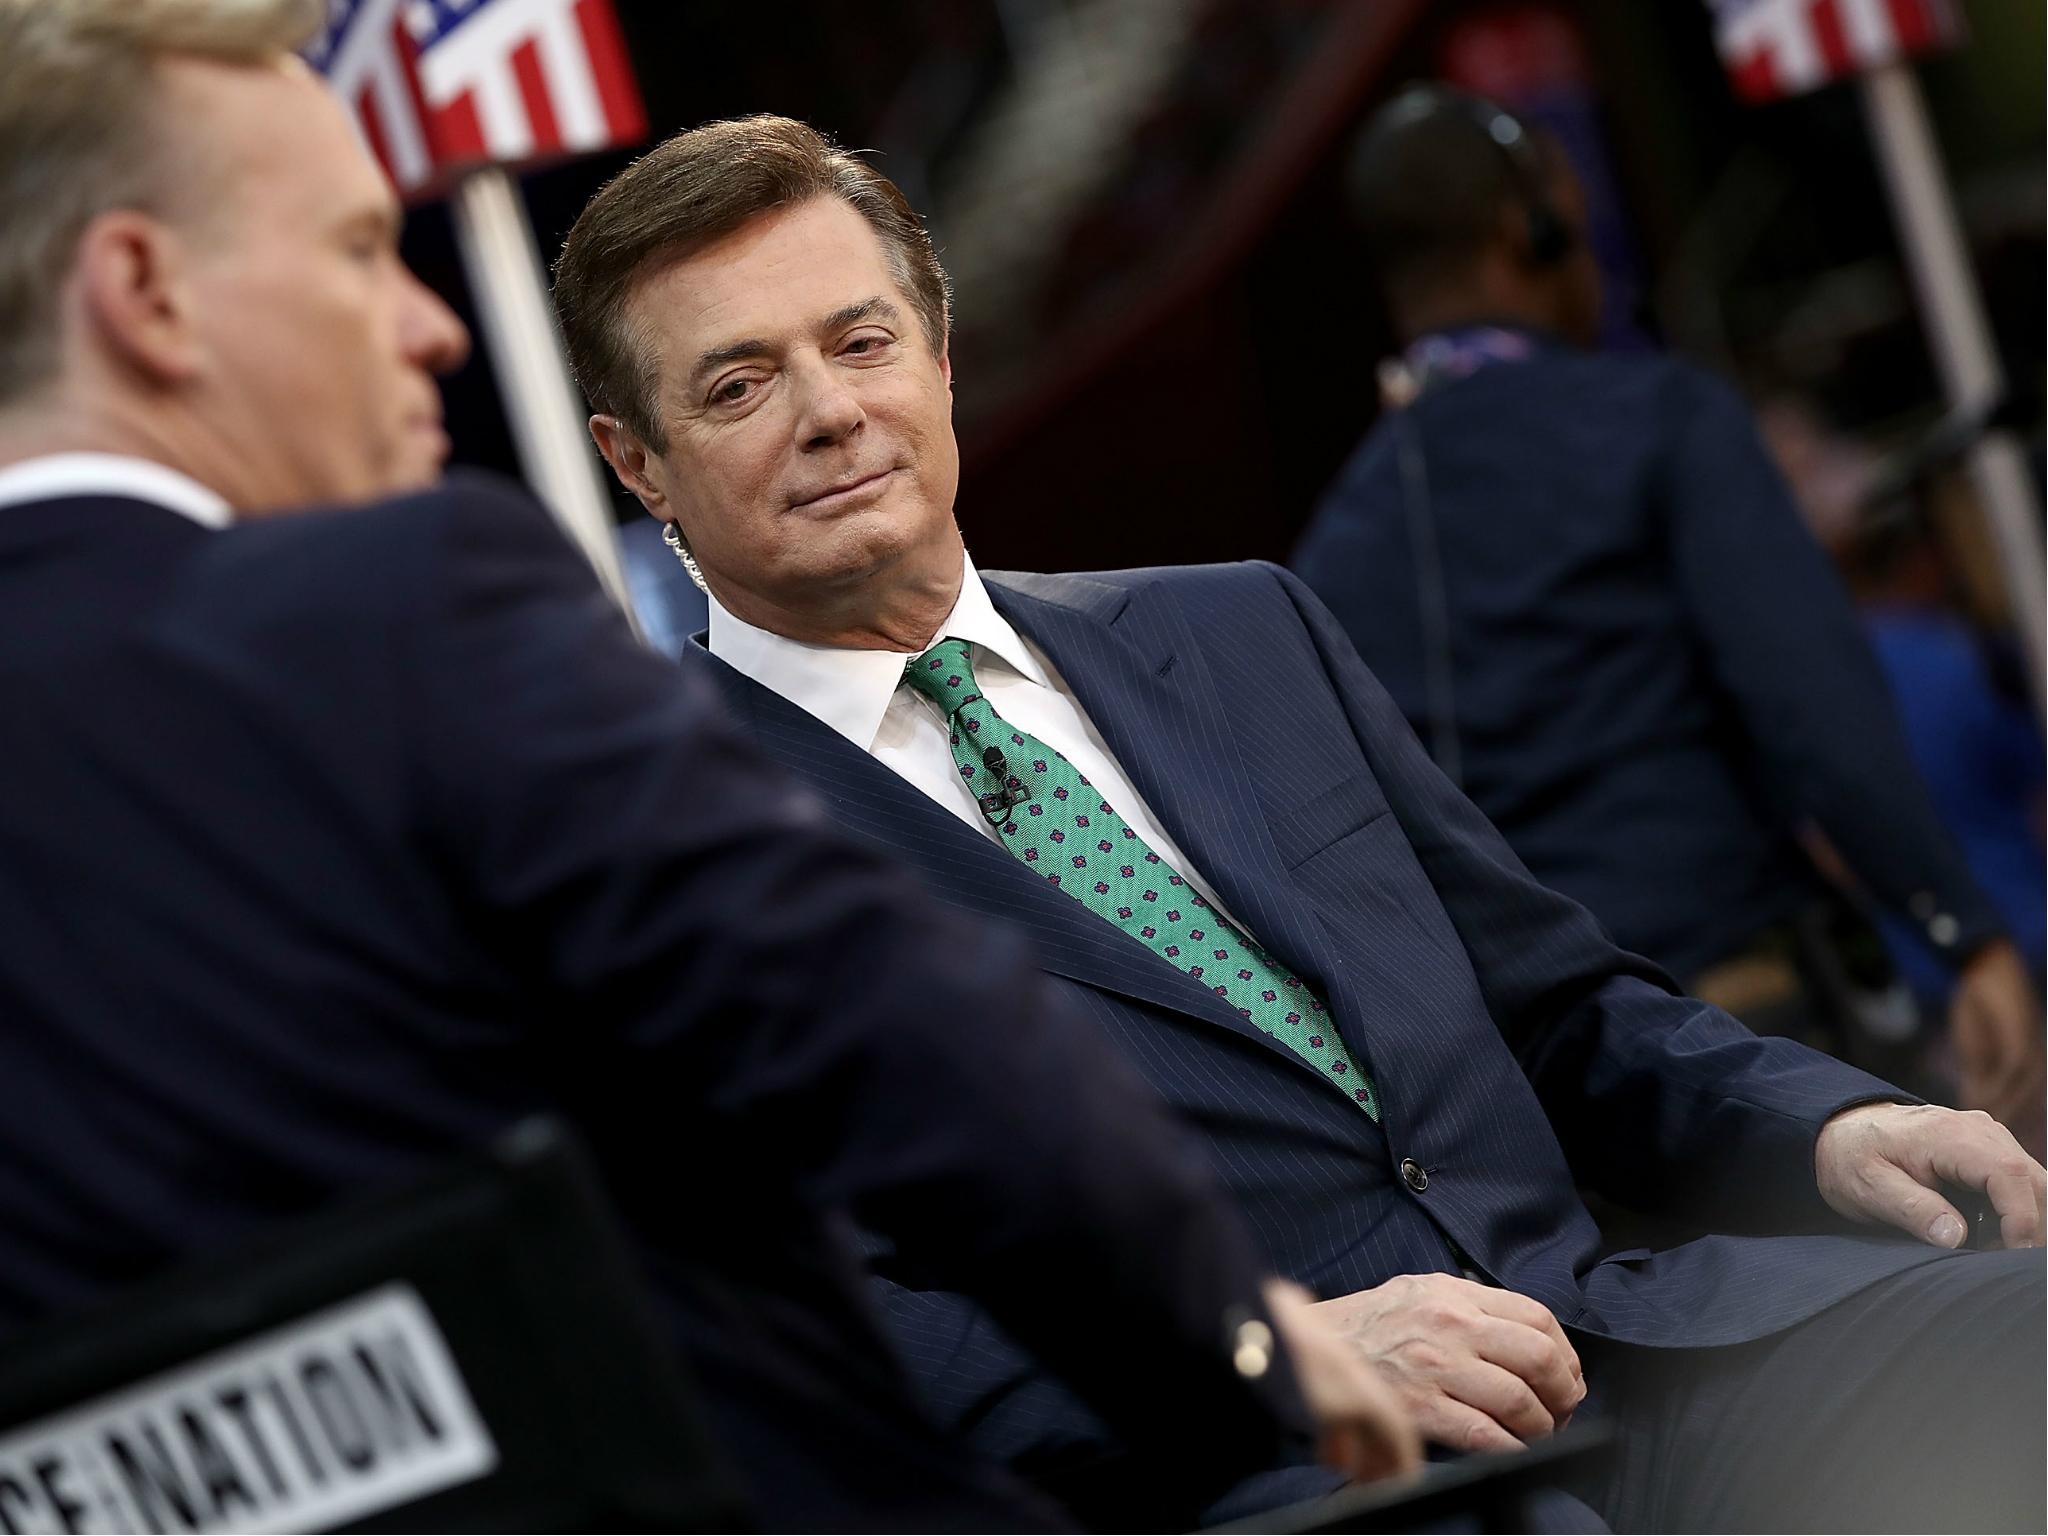 Paul Manafort, former campaign manager for President Donald Trump, is interviewed on the floor of the Republican National Convention 17 July 2016.